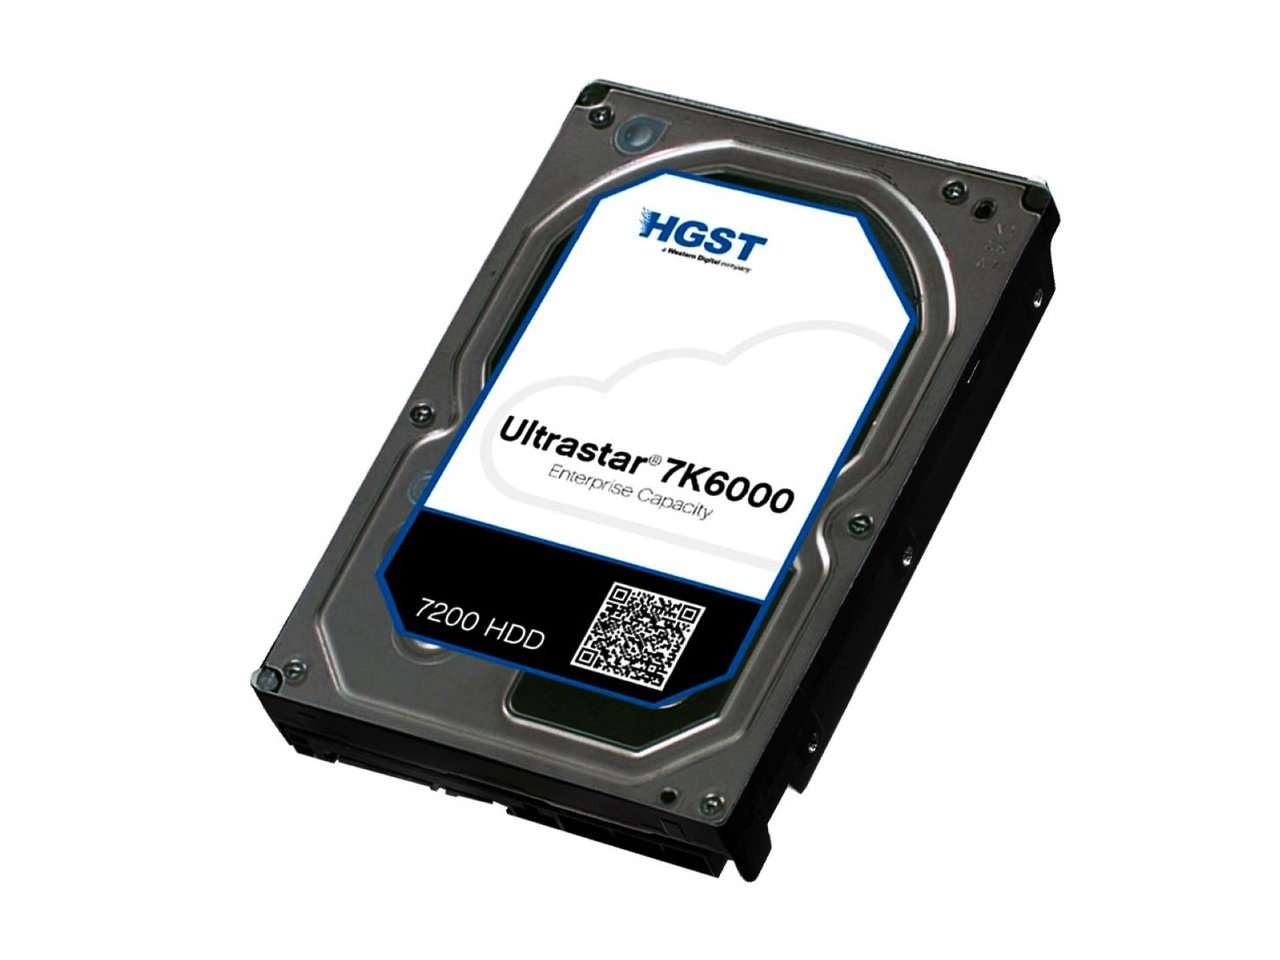 HGST Ultrastar 7K6000 0F22962  HUS726040ALS215 4TB 7.2K RPM SAS 12Gb/s 512n 128MB Cache 3.5" TCG FIPS HDD